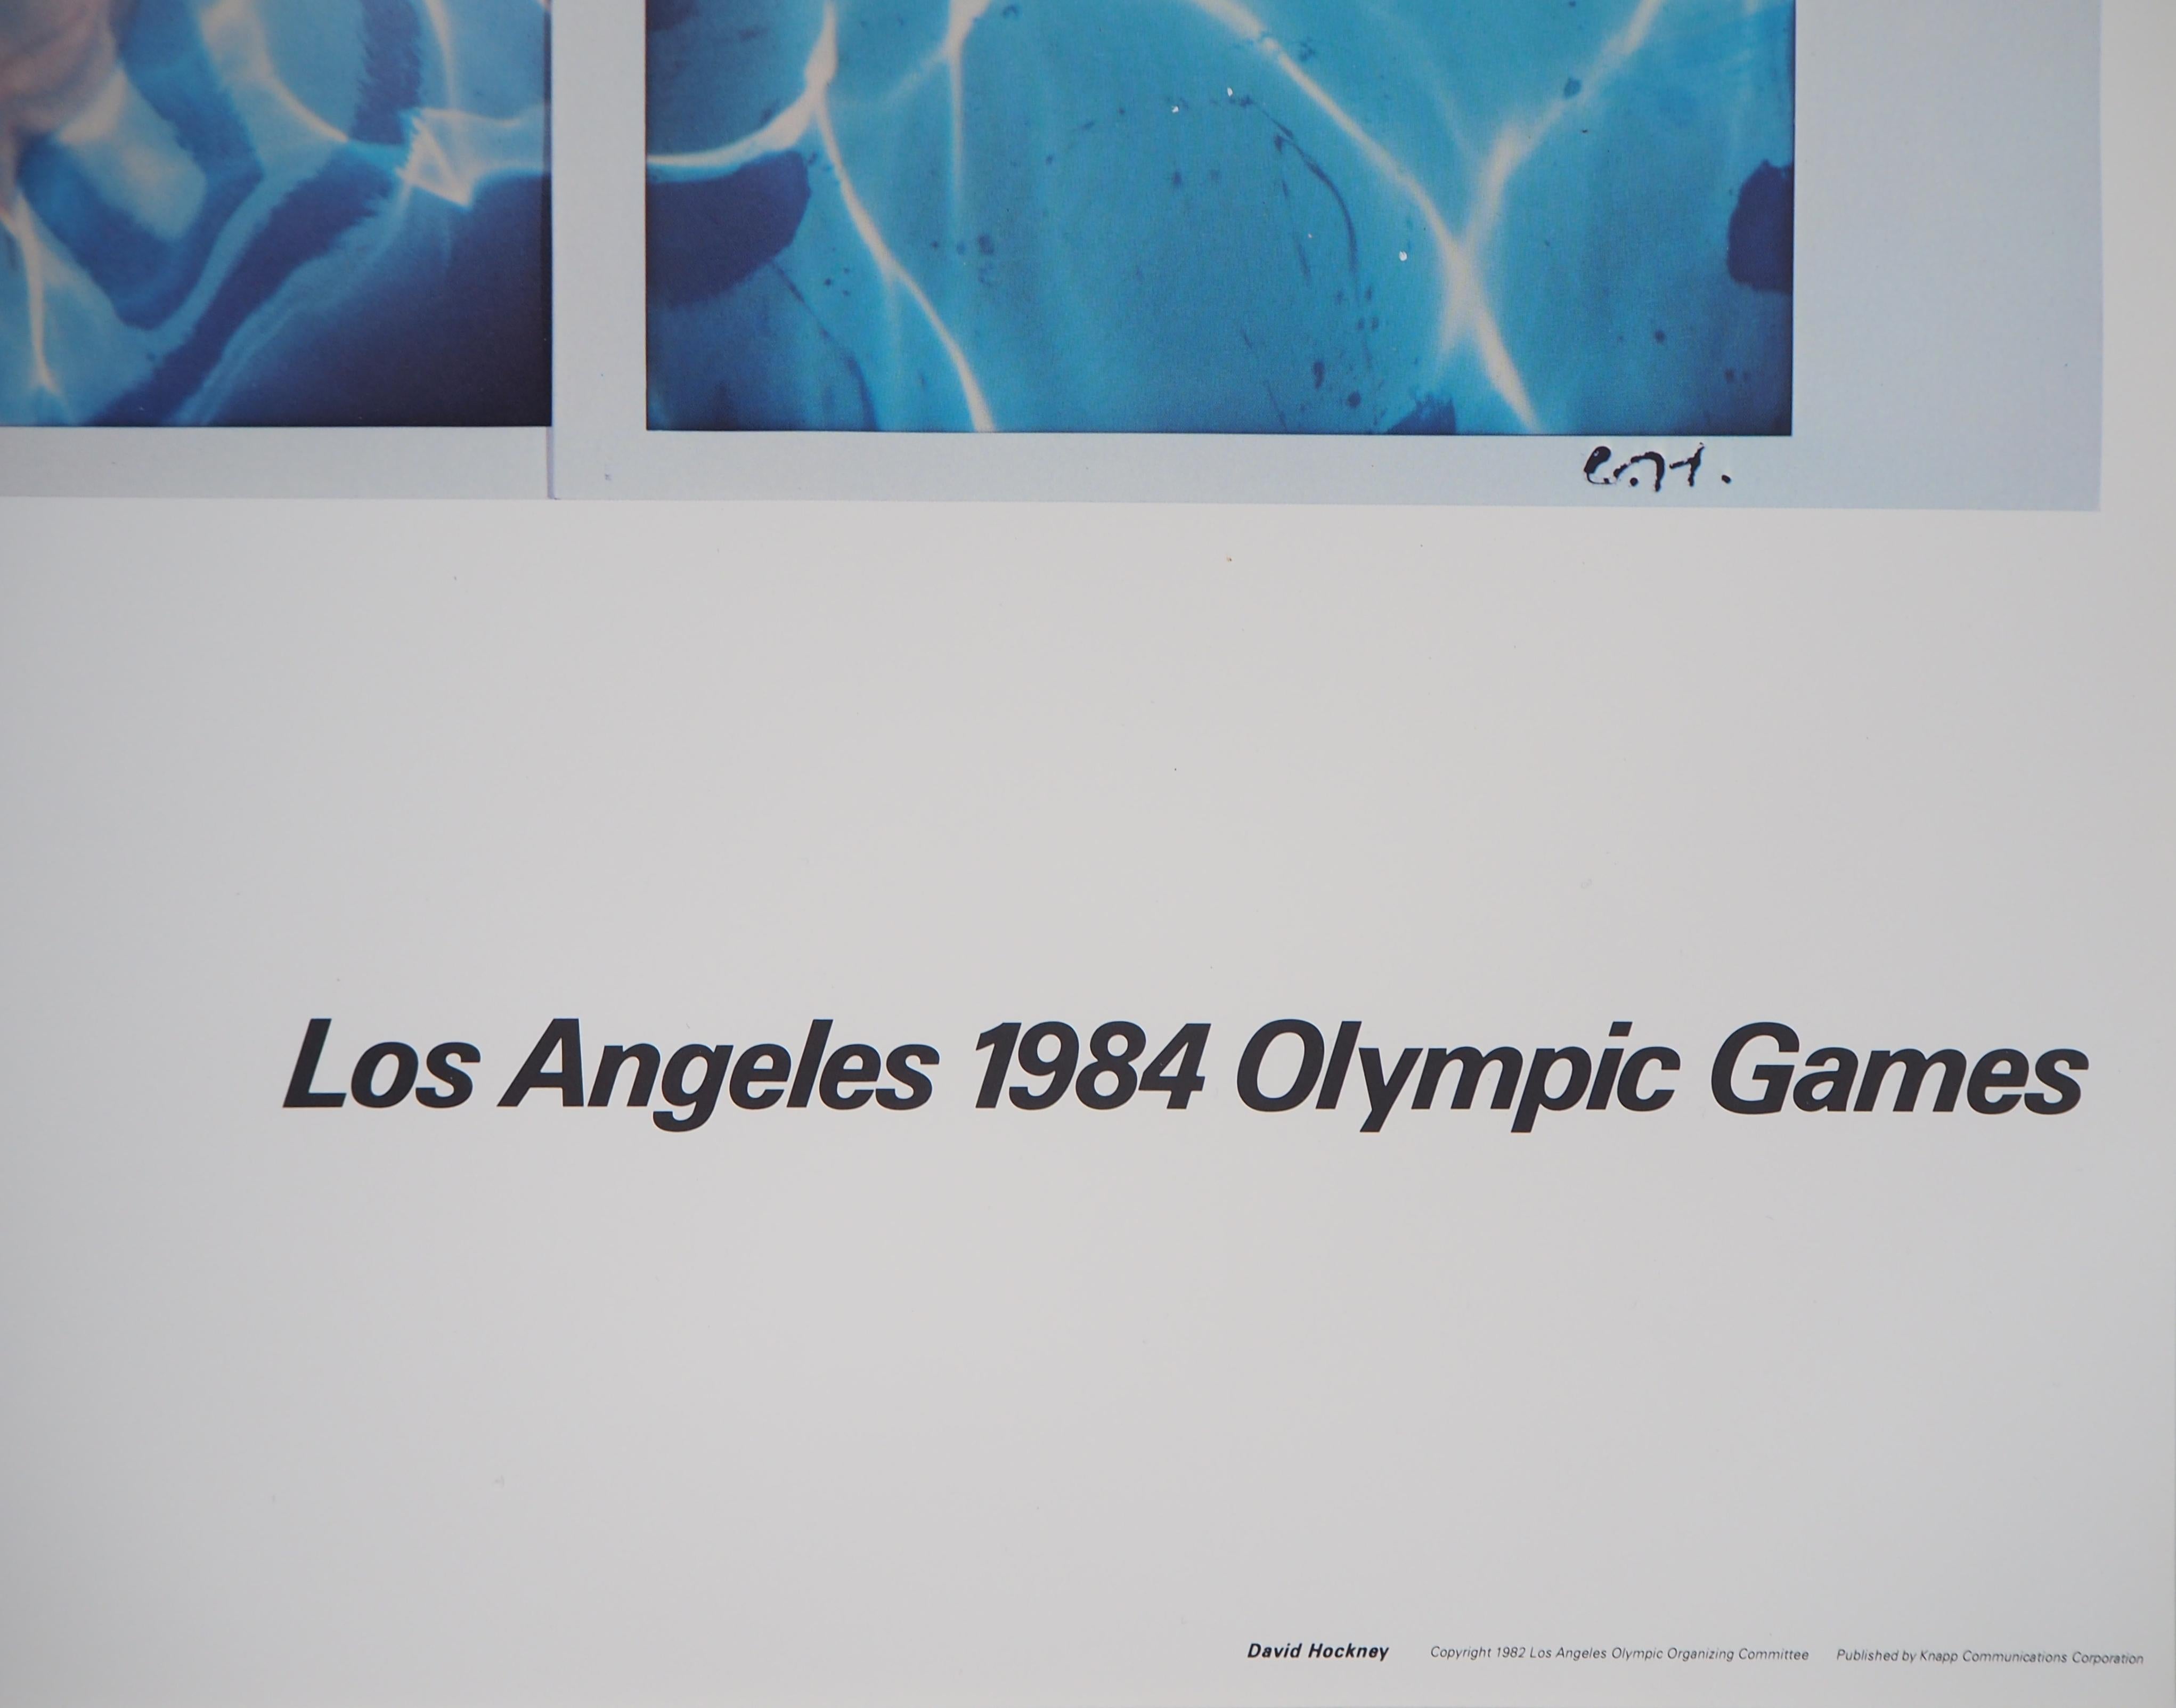 Swimmer / Pool Diver - Offset Lithograph (Olympic Games, Los Angeles 1984) - Blue Figurative Print by David Hockney